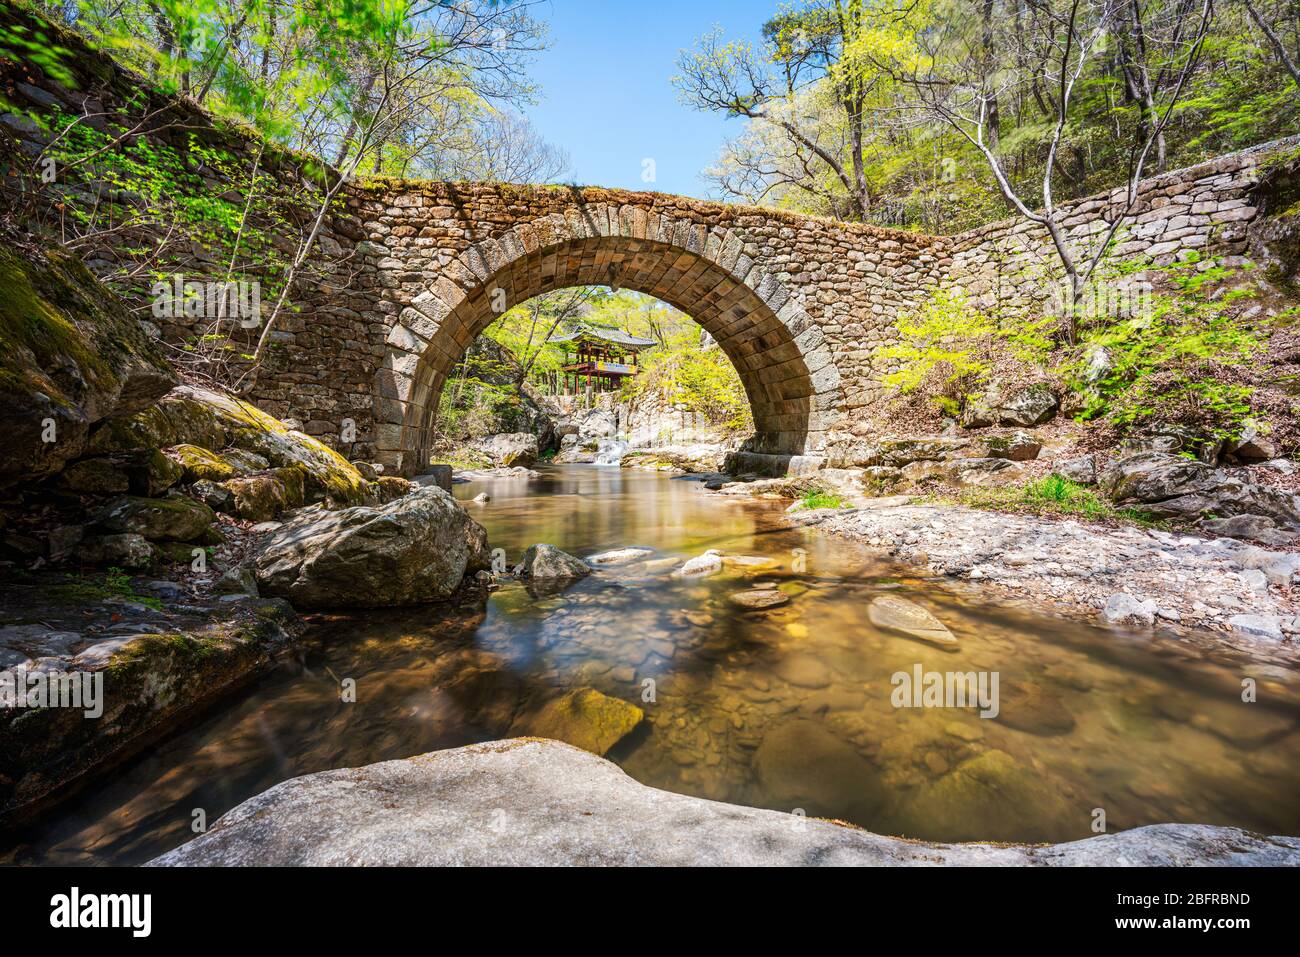 Jogyesan Provincial Park, Korea - 18 APRIL 2020: Seonamsa is famous for its beautiful spring blossoms, as well as its historic arched bridge Seungseon Stock Photo